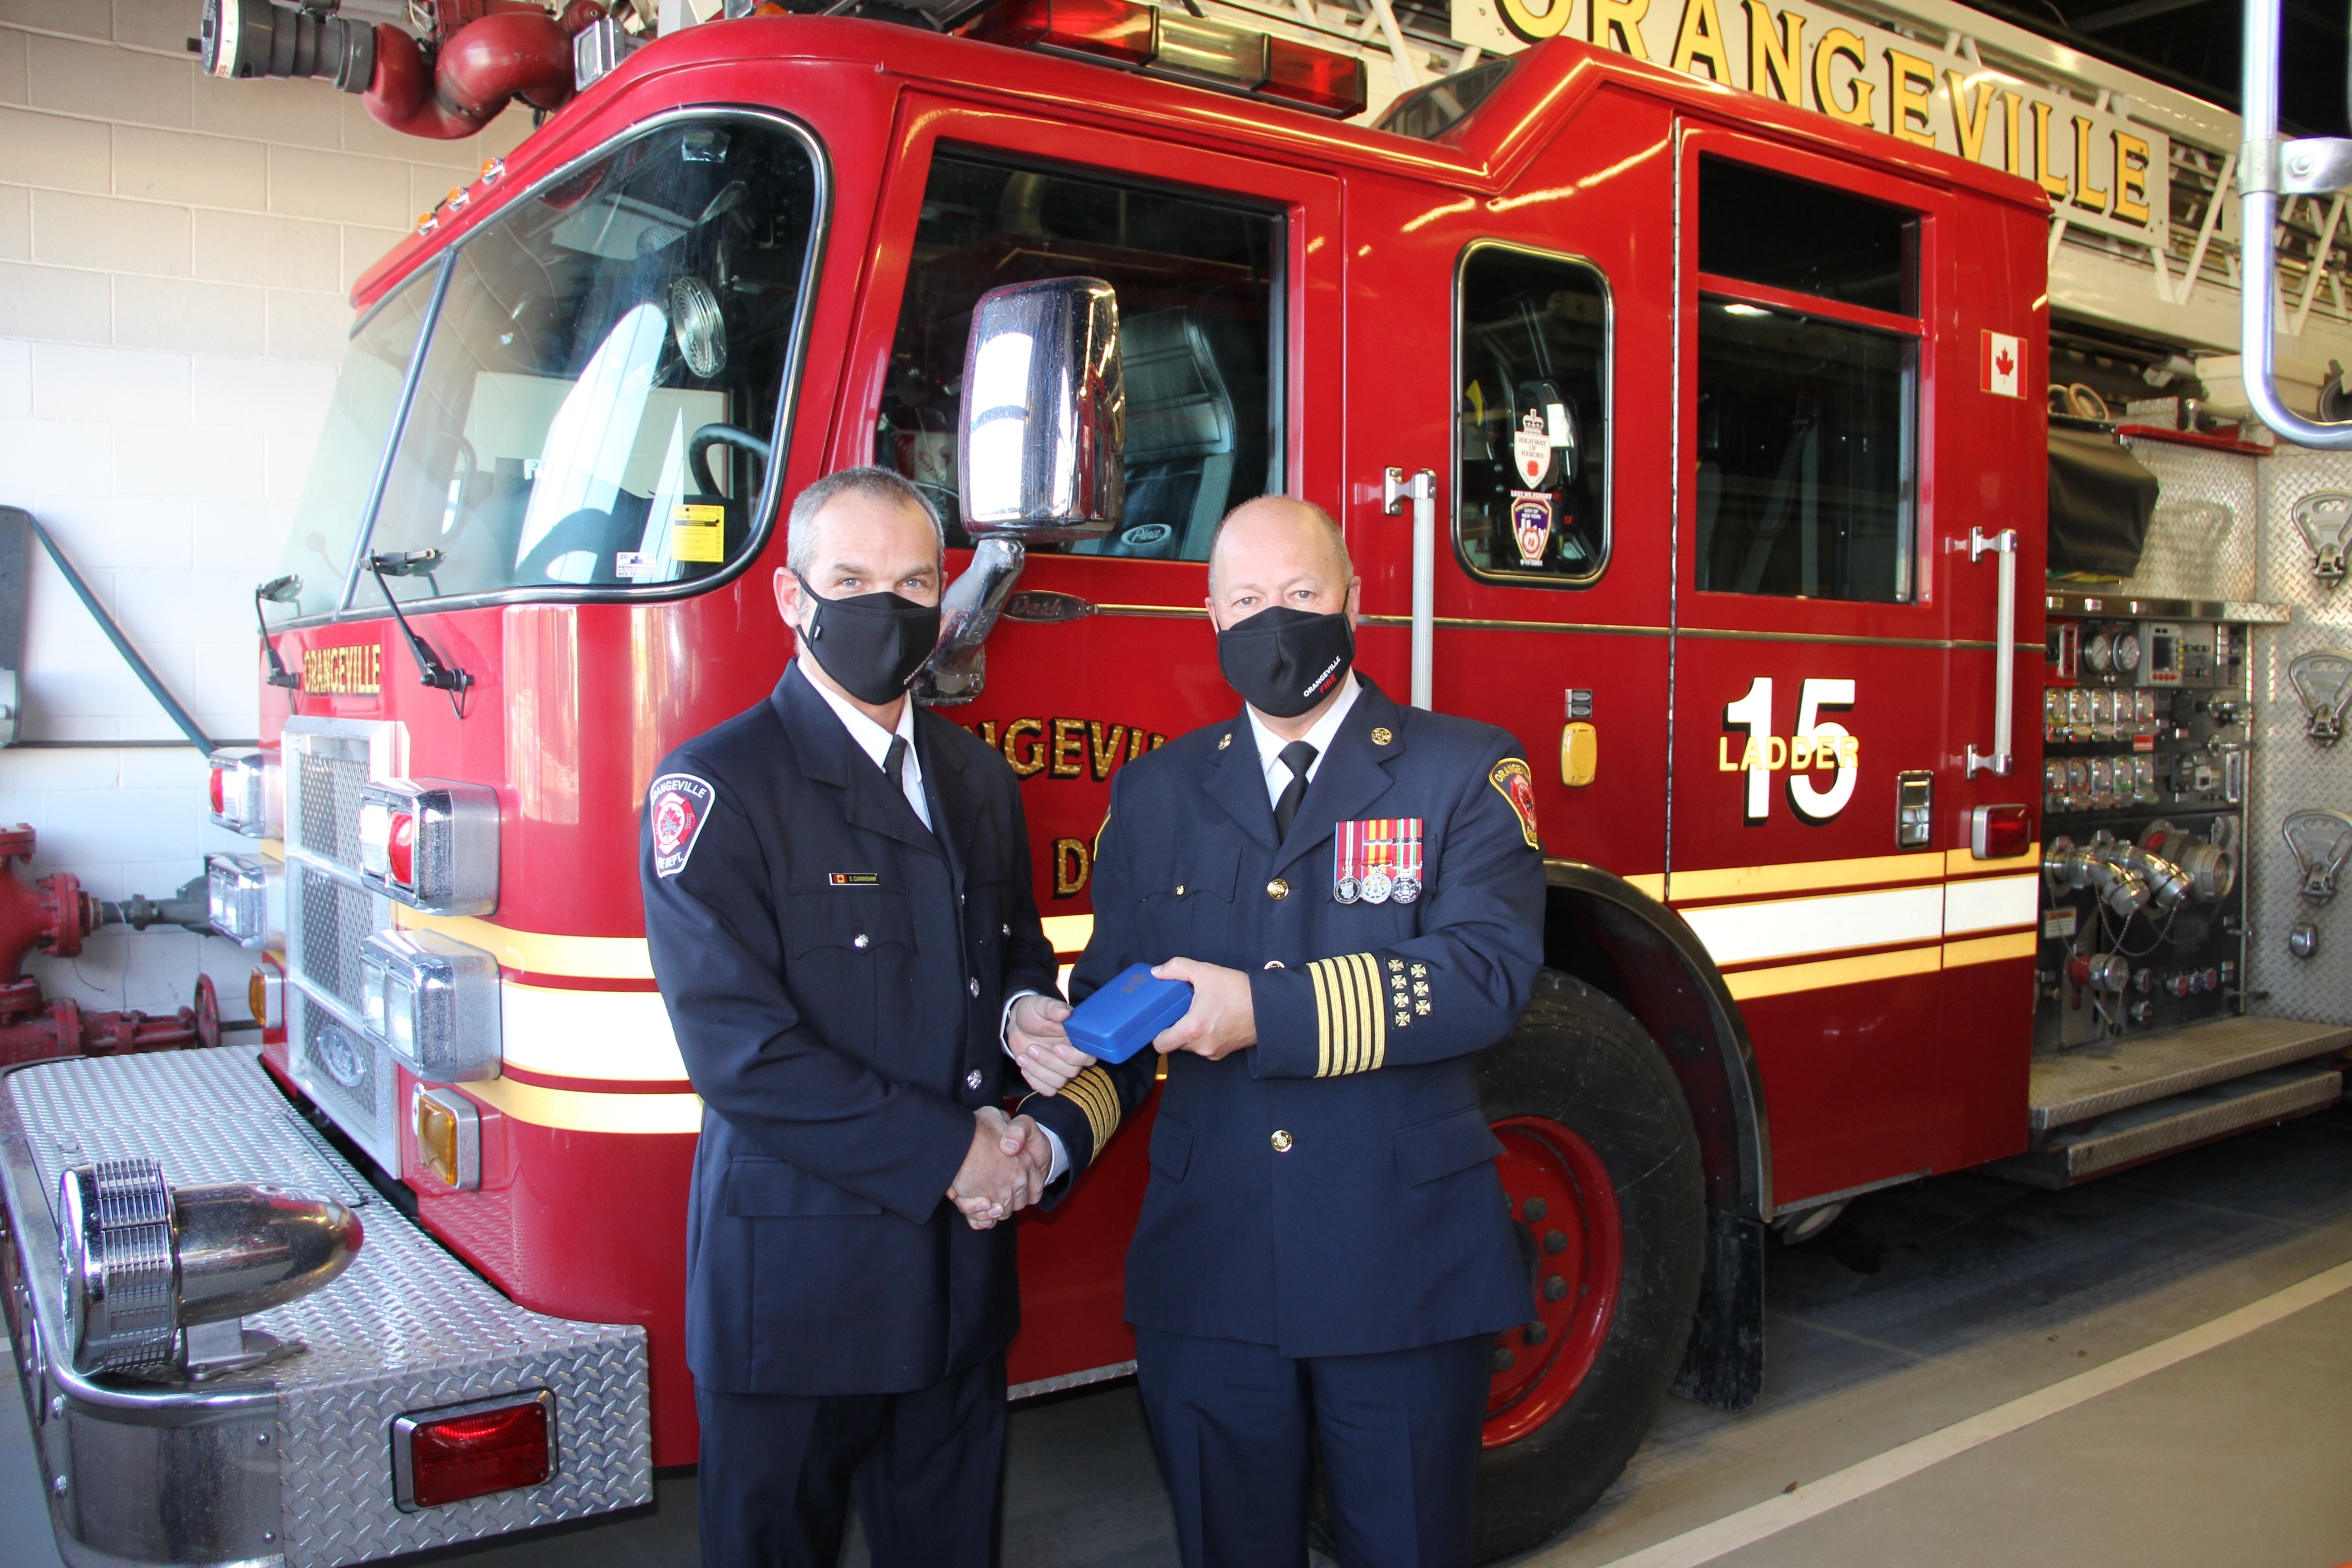 Shane Cunningham accepts the Federal Fire Services Exemplary Service Medal from Orangeville Fire Chief Ronald Morden